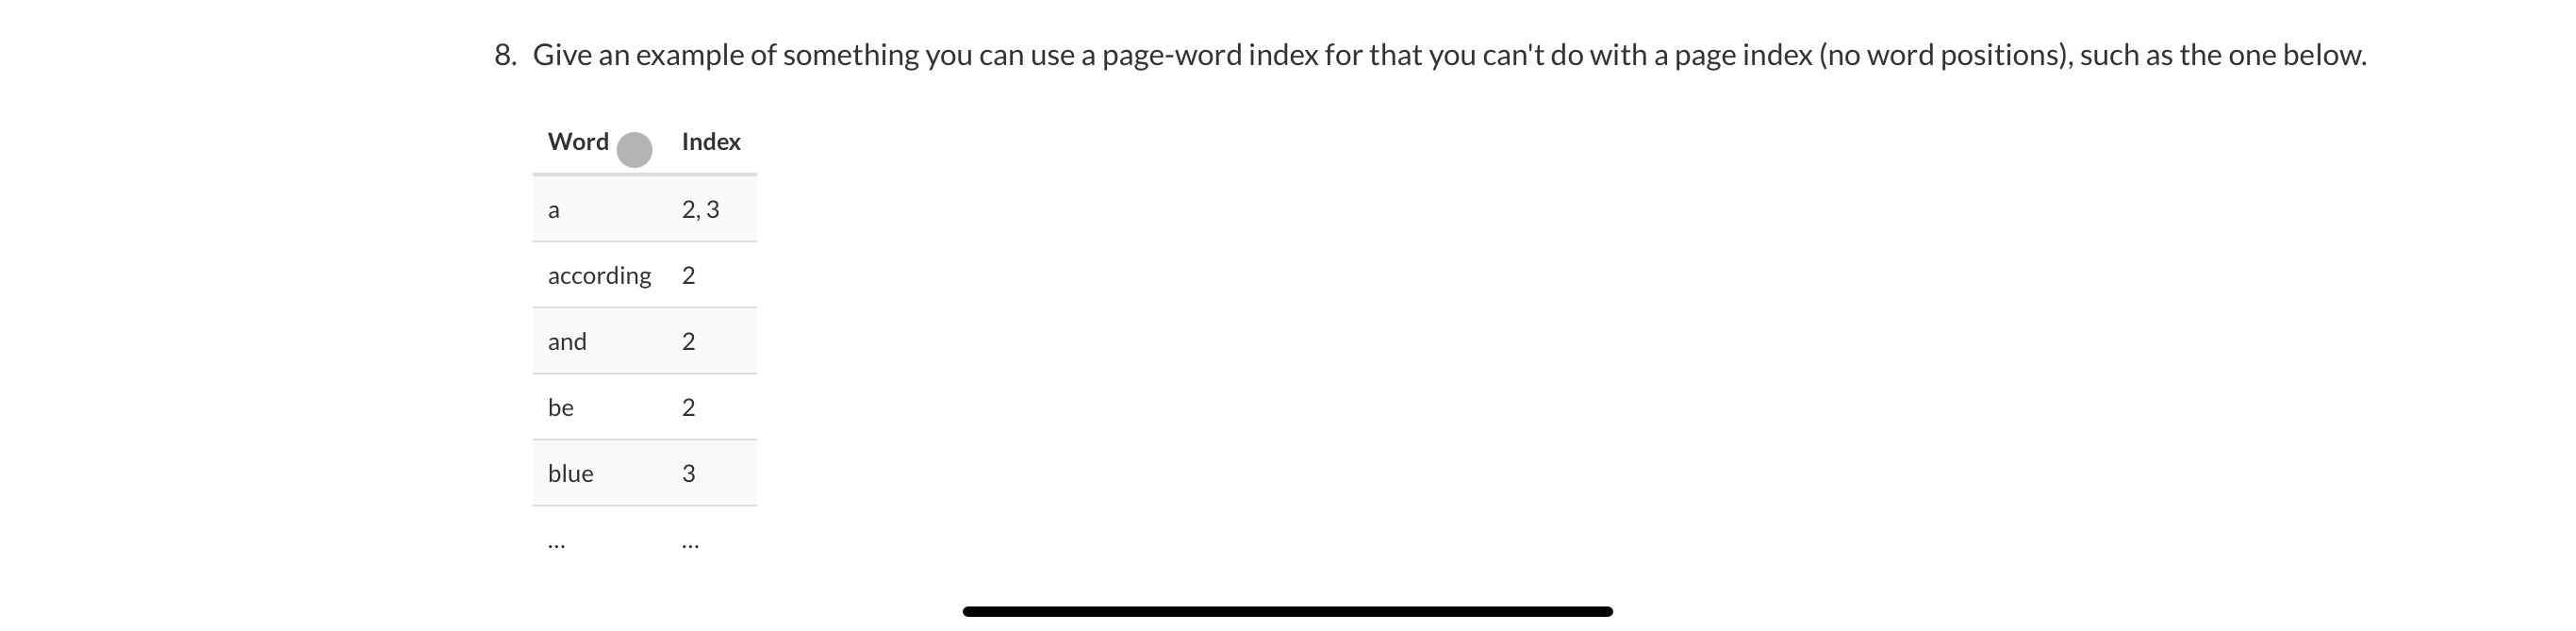 8. Give an example of something you can use a page-word index for that you can't do with a page index (no